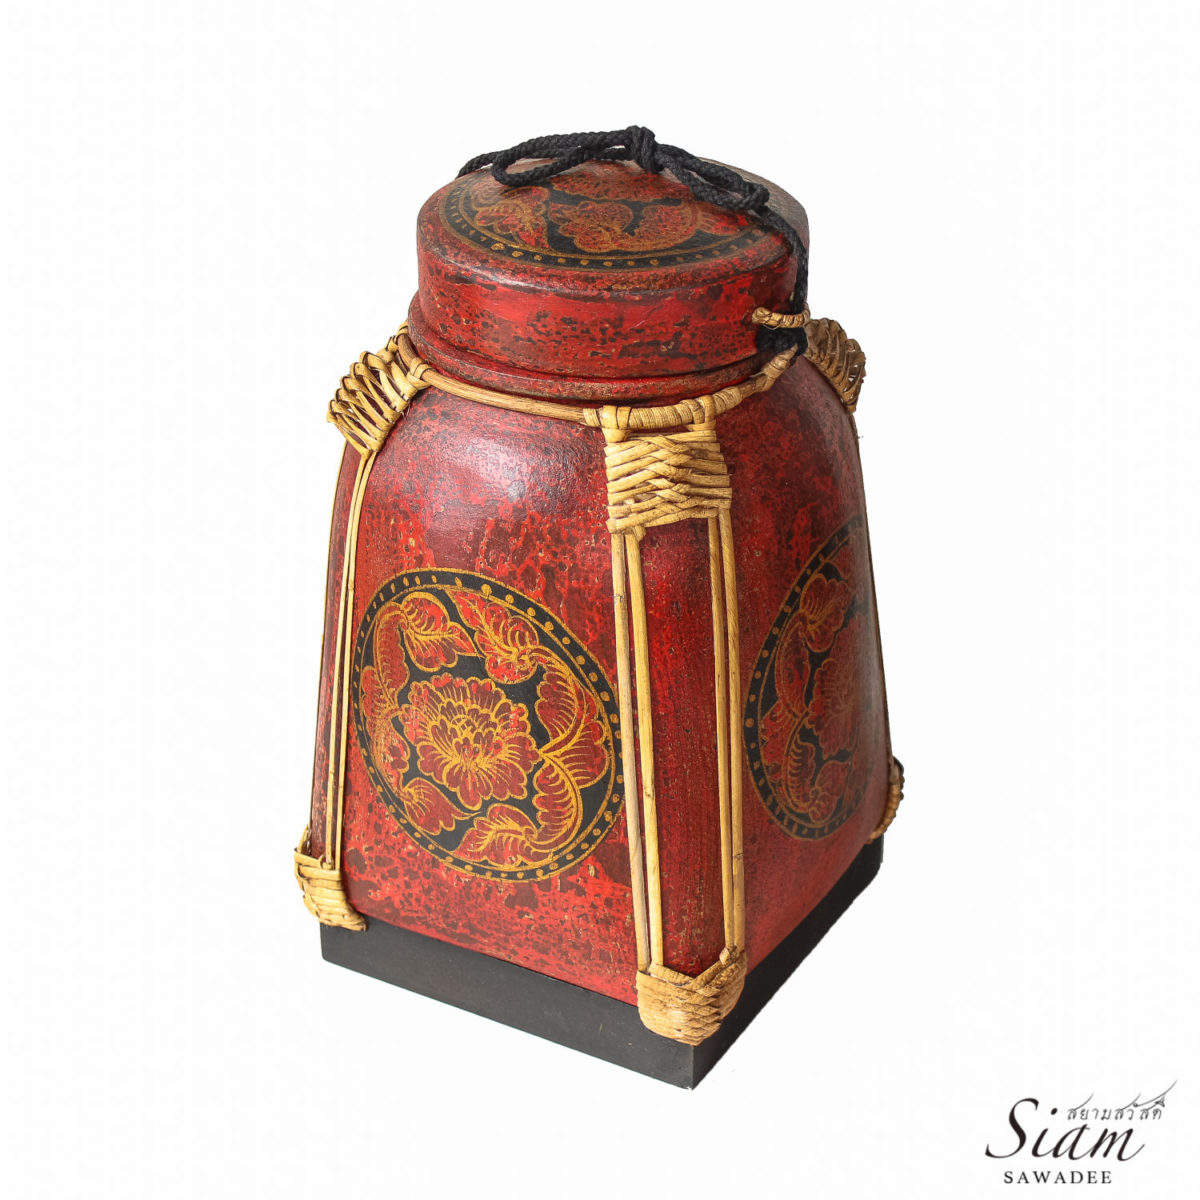 Red-Chinese-Style-Thai-Rice-Basket-Box.-Decorative-Jar-With-Lid.-Vintage-Authentic-Hand-Painted-Original-Made-From-Bamboo-1.jpg